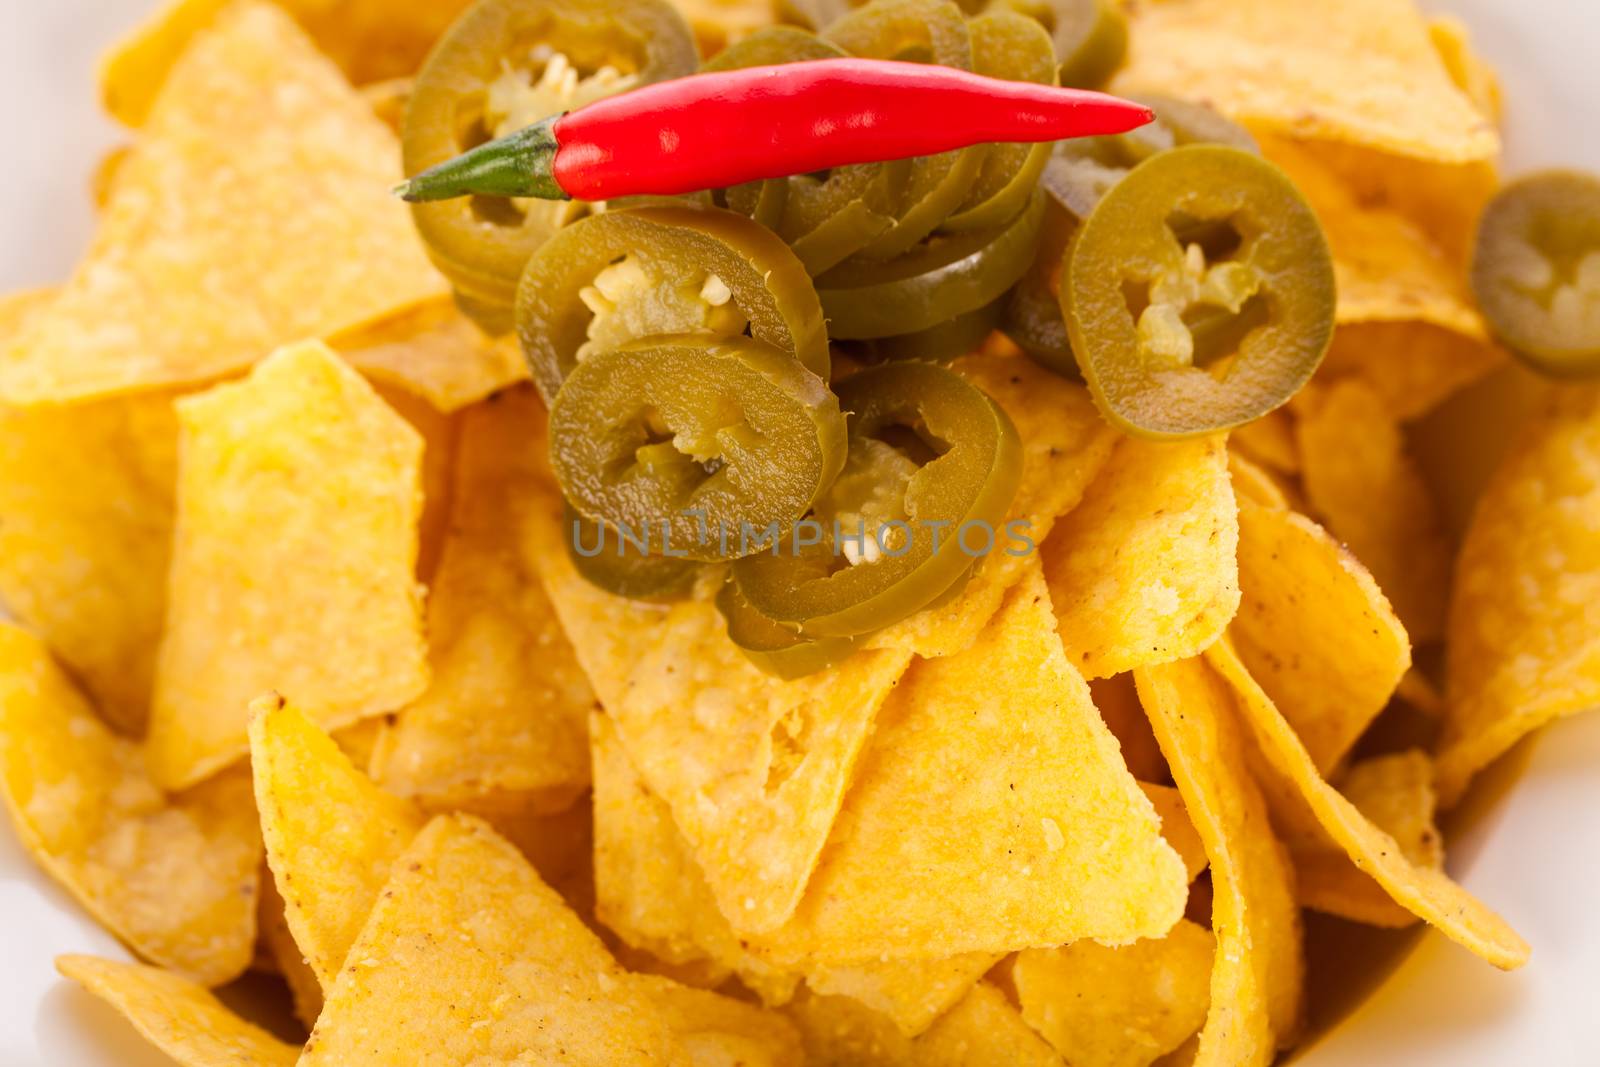 Bowl of crisp golden corn nachos with cheese sauce or dip and olives served as a starter or appetizer to a meal